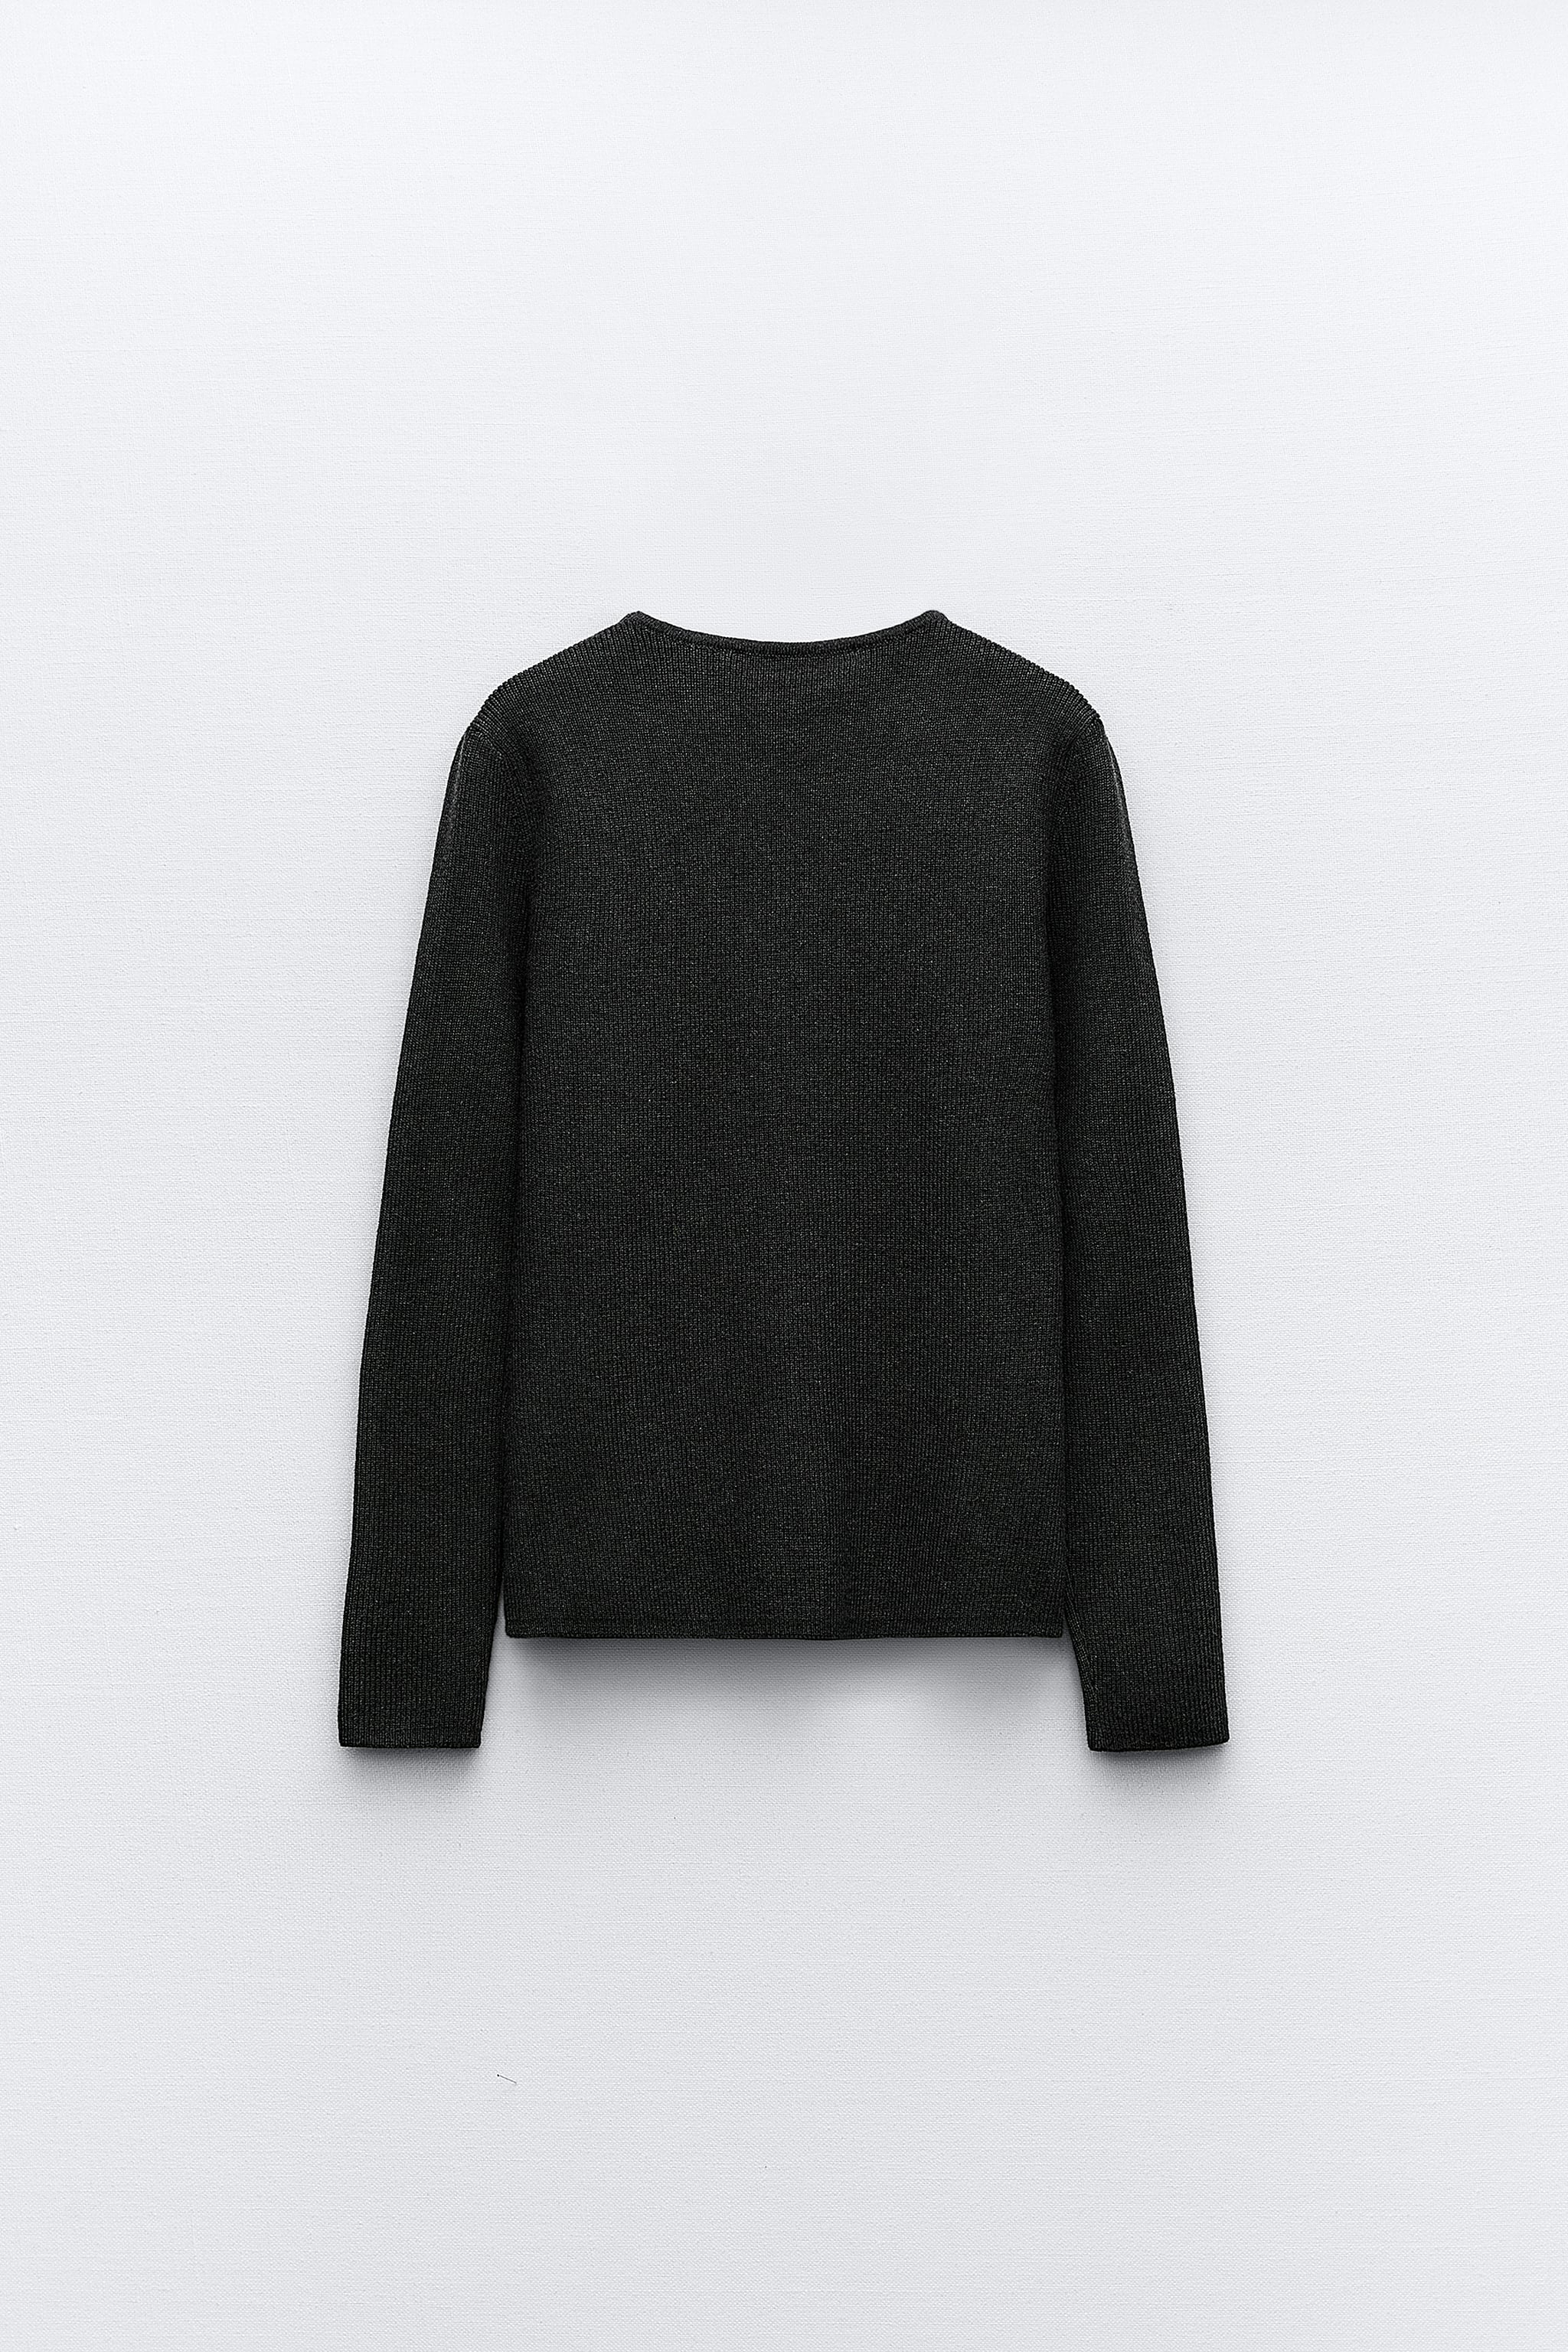 SIDE BUTTON KNIT SWEATER